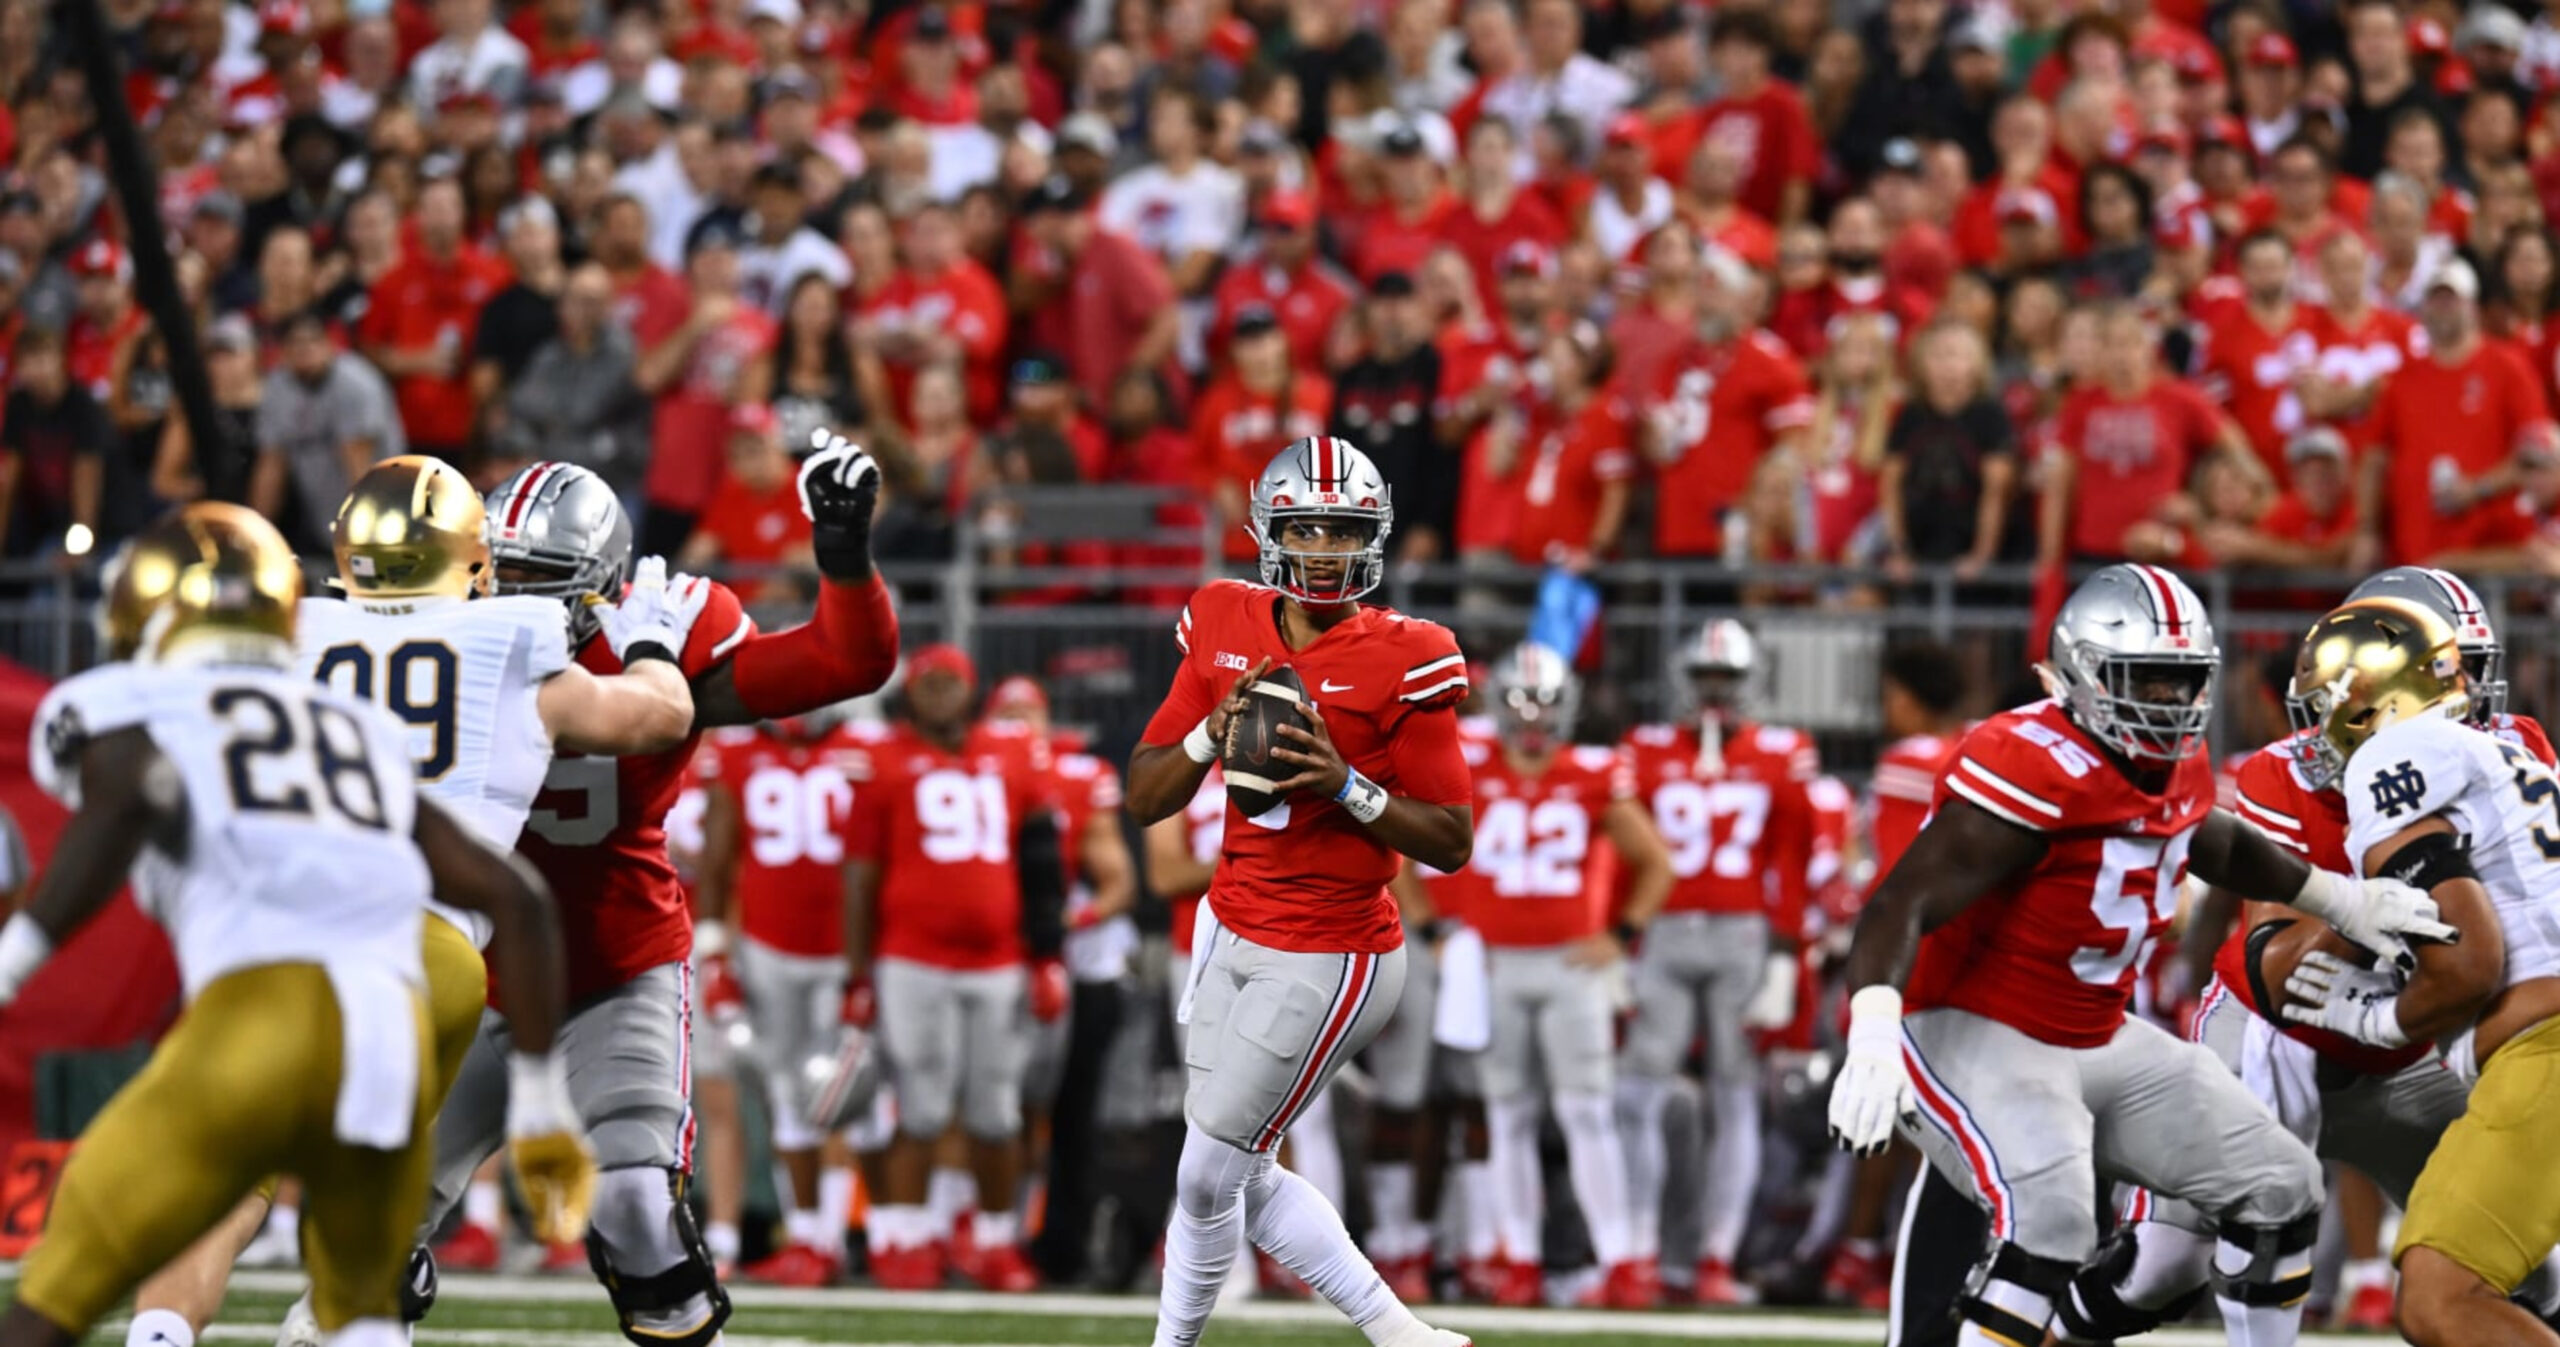 OSU’s C.J. Stroud Dazzles Fans with ‘Special’ Throws, No. 1 Pick Potential vs. ND